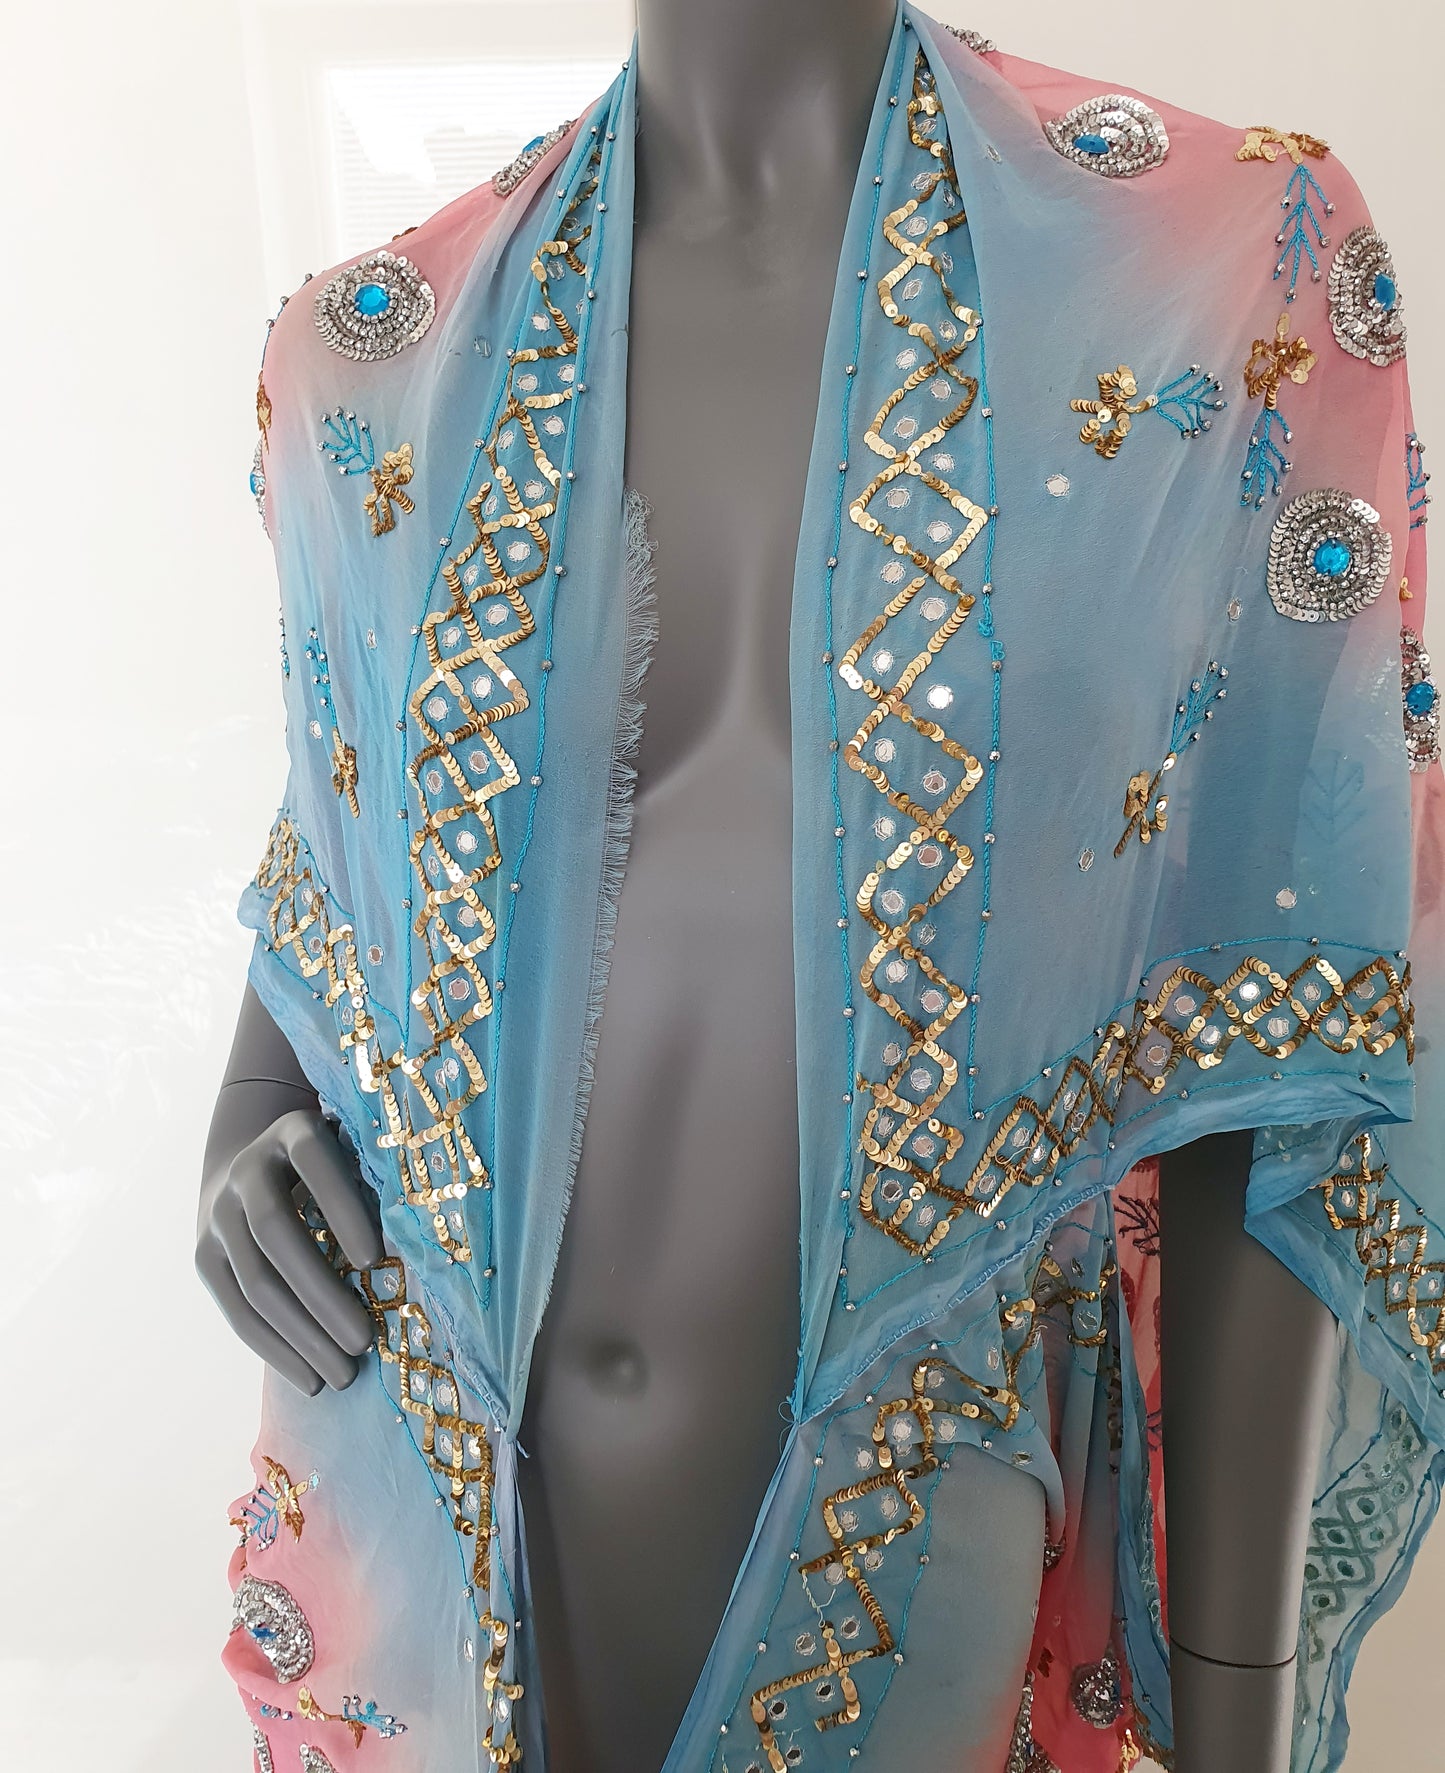 Draped kimono in light pink & blue, hand embroidered with silver and blue beads (M-L)